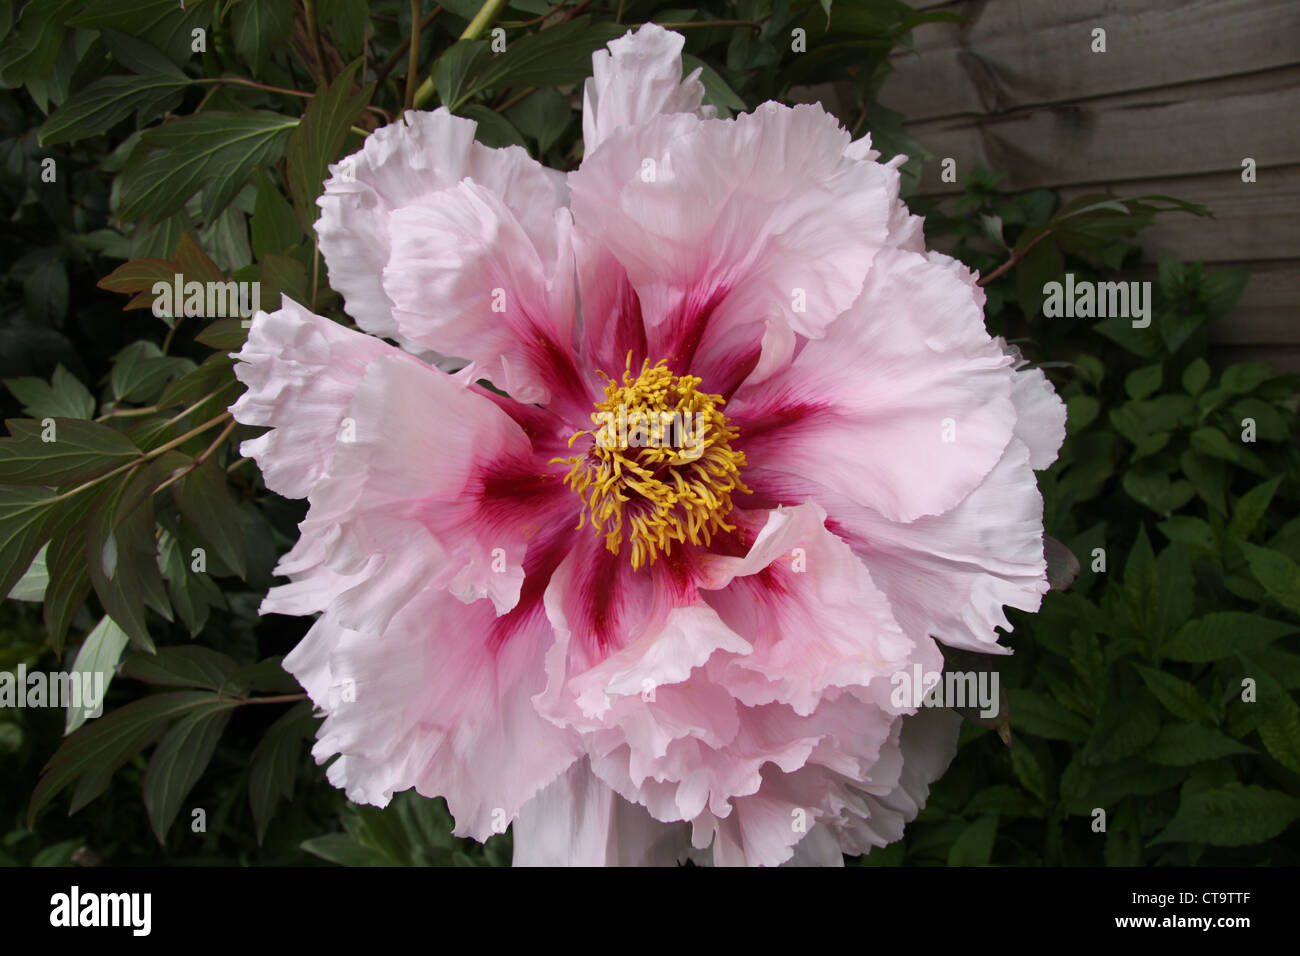 Giant Tree Peony in pale pink outer petals and deep pink center which contrast with the yellow stamen surrounded by green leaves Stock Photo